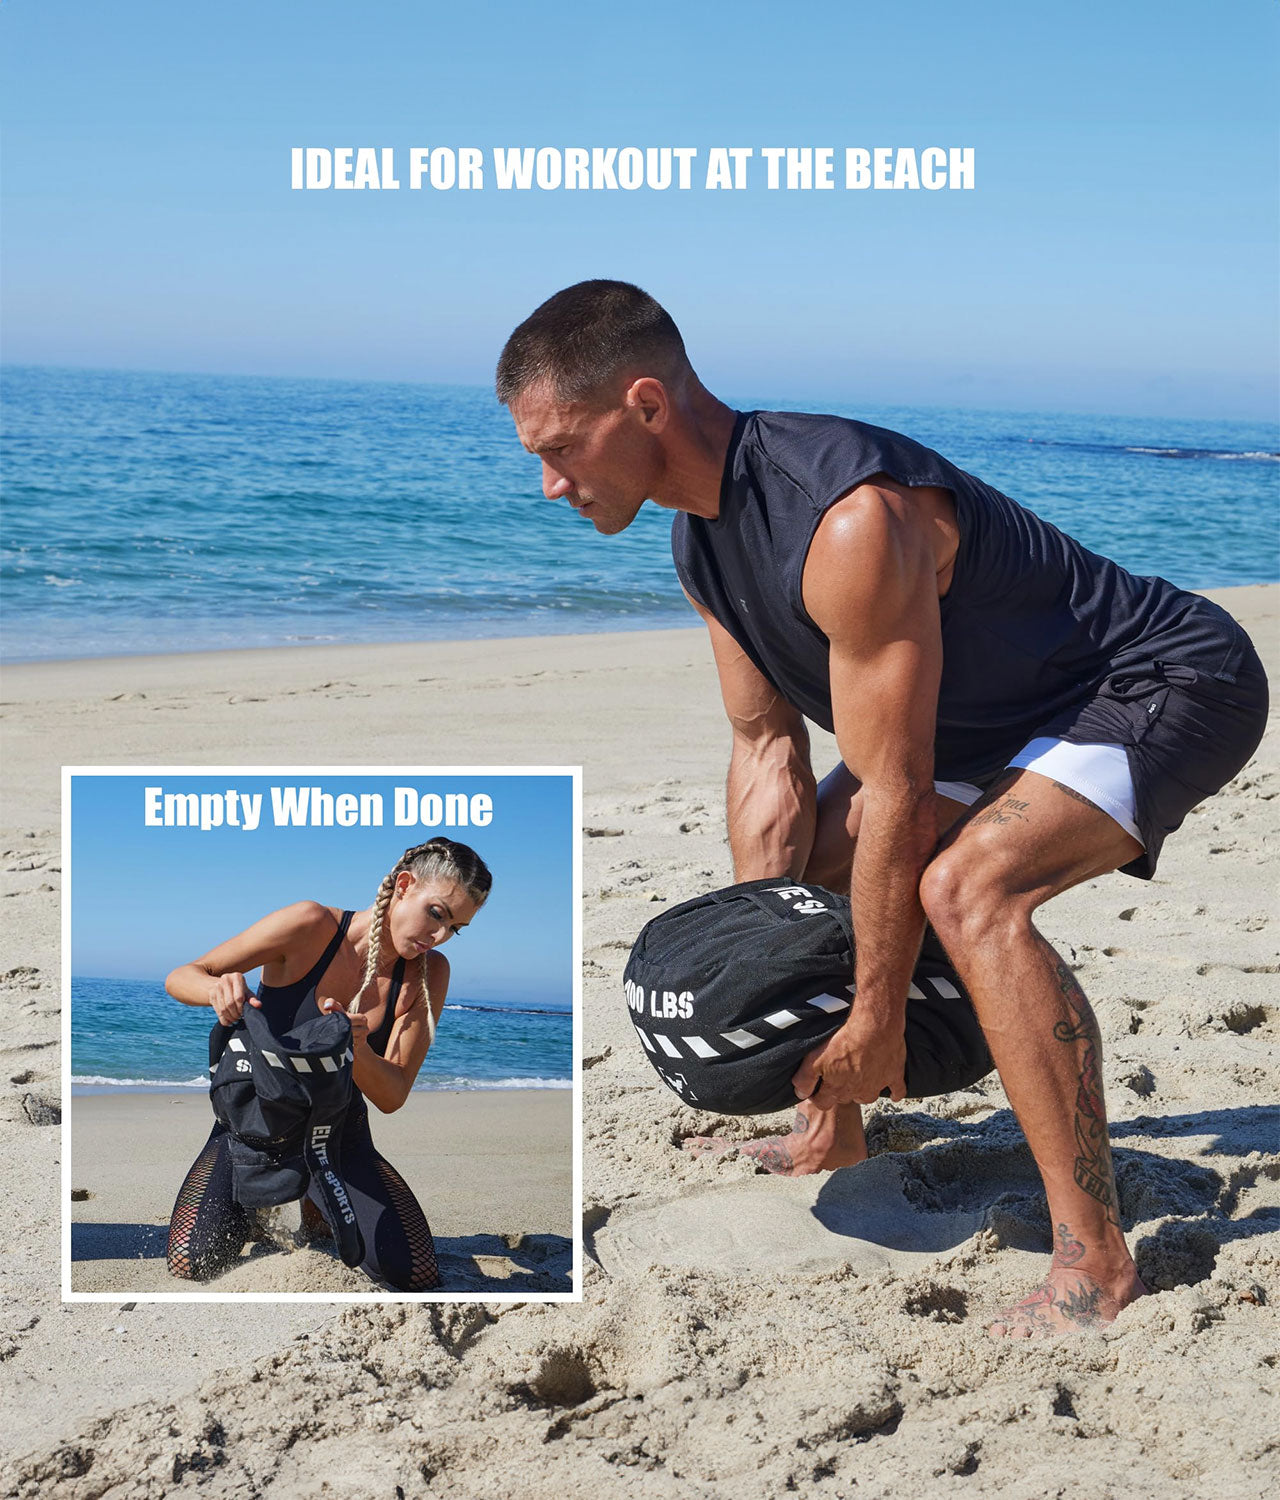 Elite Sports Core Round Workout Sandbag 120 lbs Ideal For Workout At the Beach